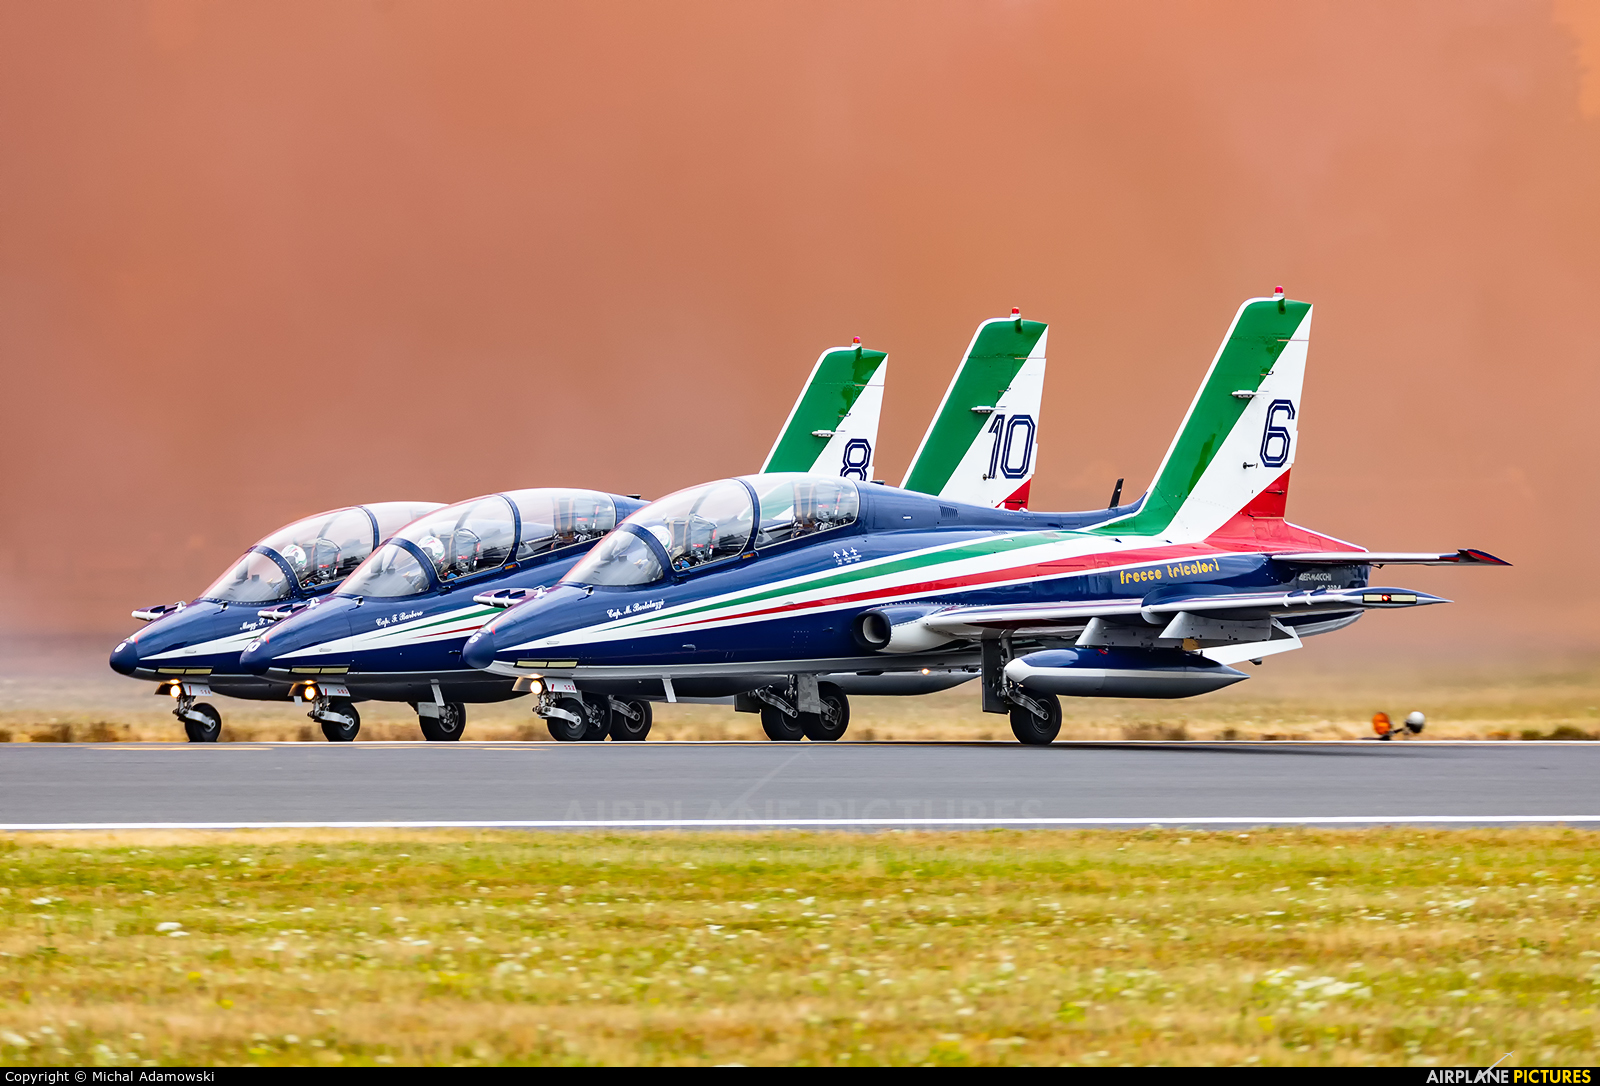 Italy - Air Force "Frecce Tricolori" MM54538 aircraft at Fairford